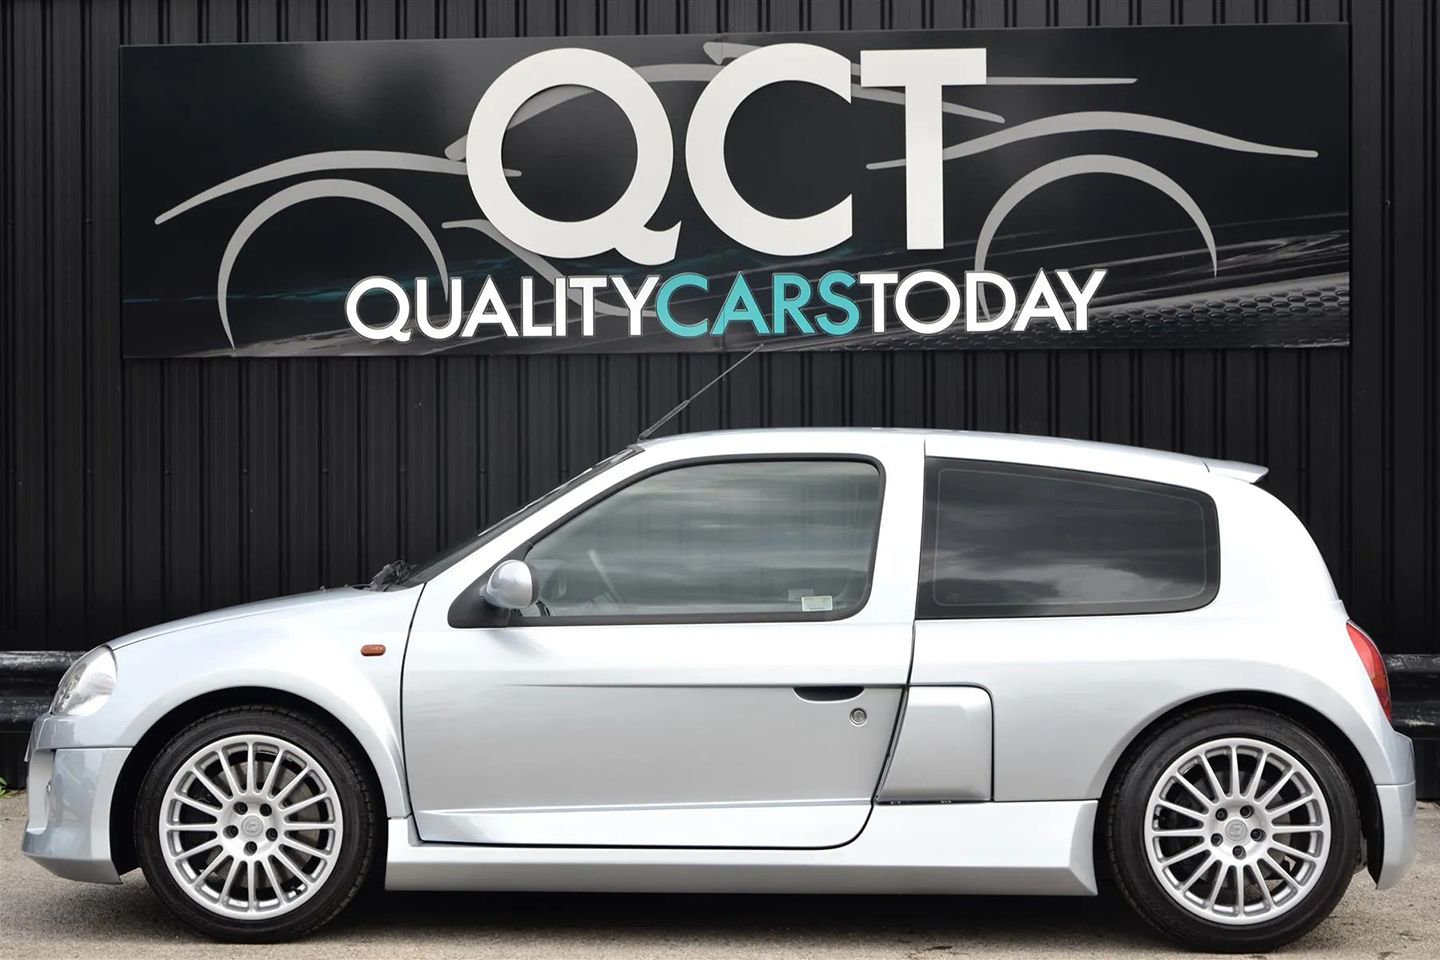 Everything You Heard About the Ridiculous Renault Clio V-6 Is True